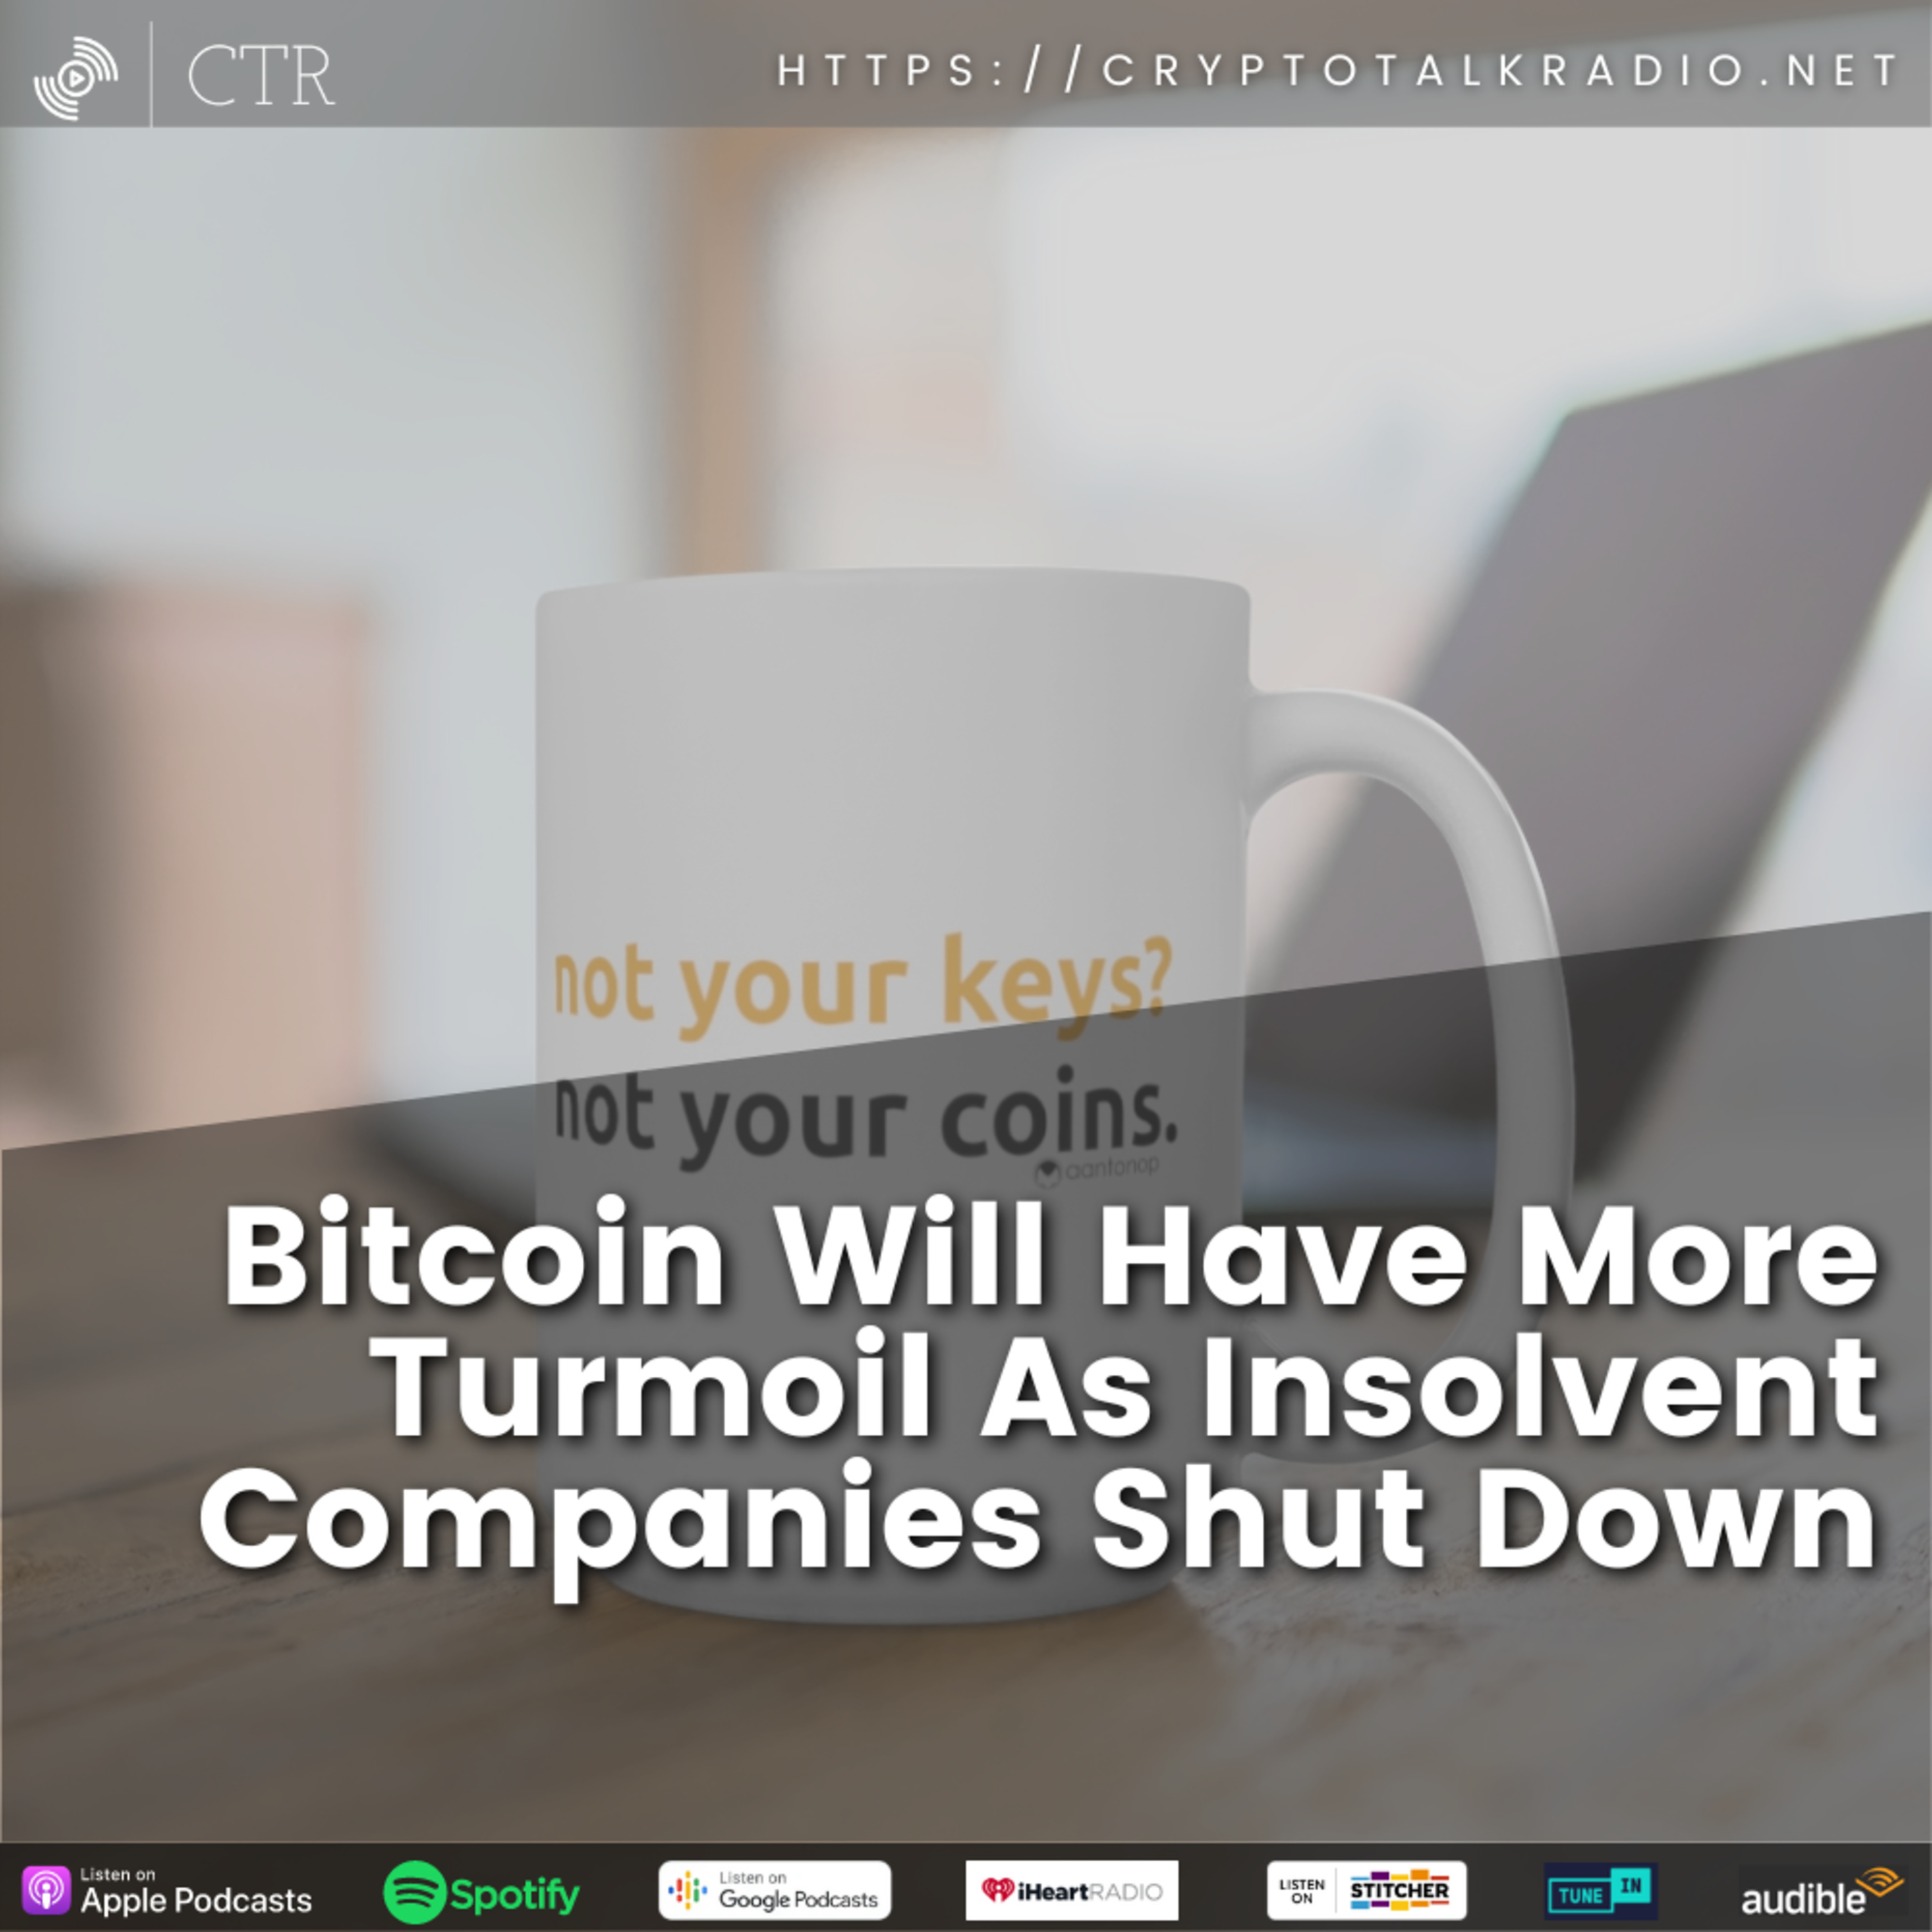 Bitcoin's Going To Suffer Quite A Bit Longer, Because More Companies Are Shutting Down And/Or Laying Off Staff